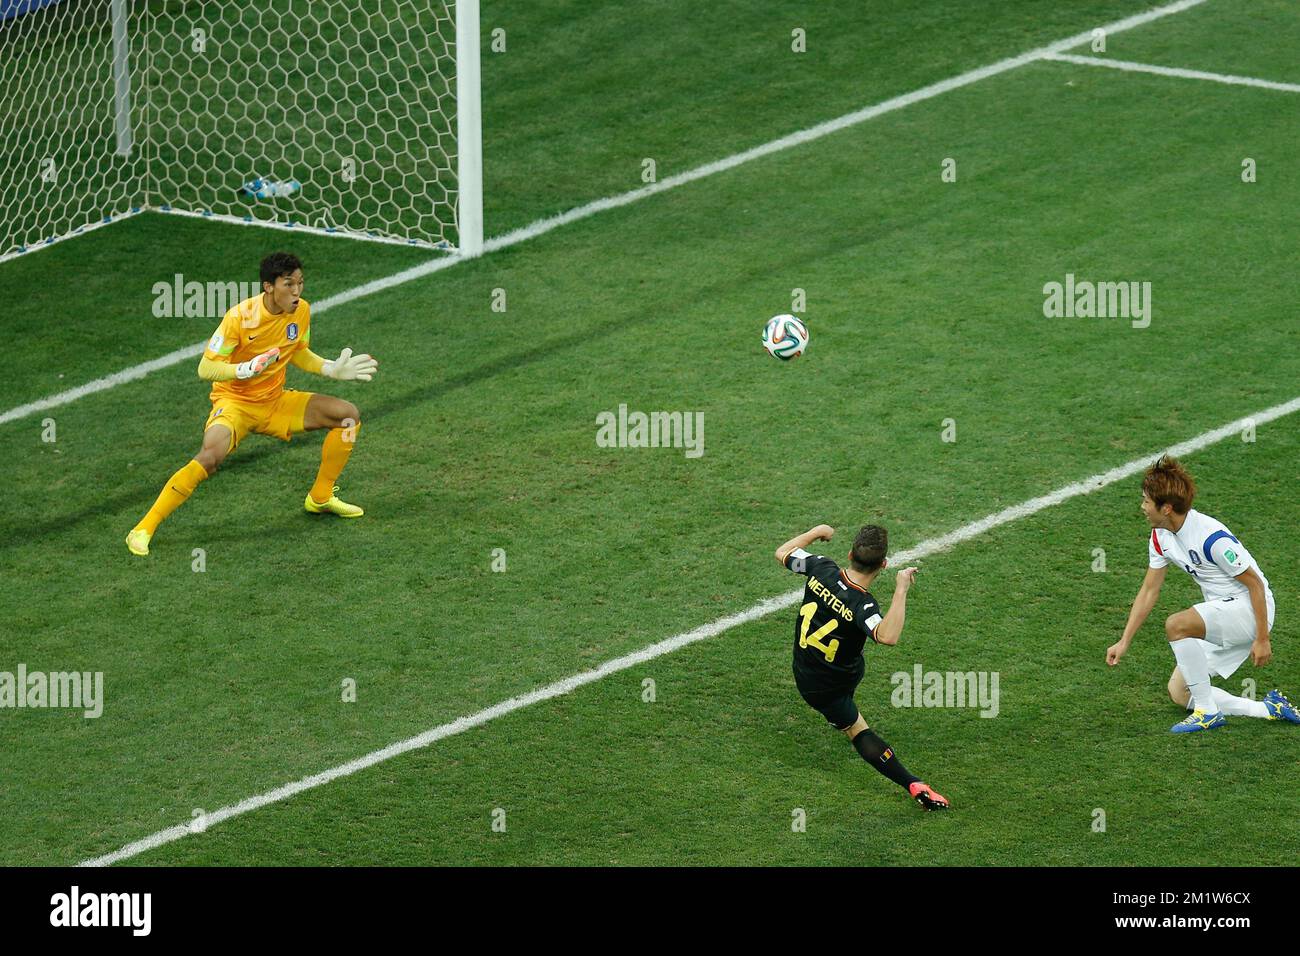 20140626 - SAO PAULO, BRAZIL: Belgium's Dries Mertens kicks the ball to South Korea's goalkeeper Seunggyu SG Kim during the match between Belgian national soccer team Red Devils and South-Korea, third match in group H, in the stadium 'Arena de Sao Paulo', in Itaquera, Sao Paulo, Brazil, during the 2014 FIFA World Cup, Thursday 26 June 2014. The Red Devils lead their group H with two victories. BELGA PHOTO BRUNO FAHY Stock Photo